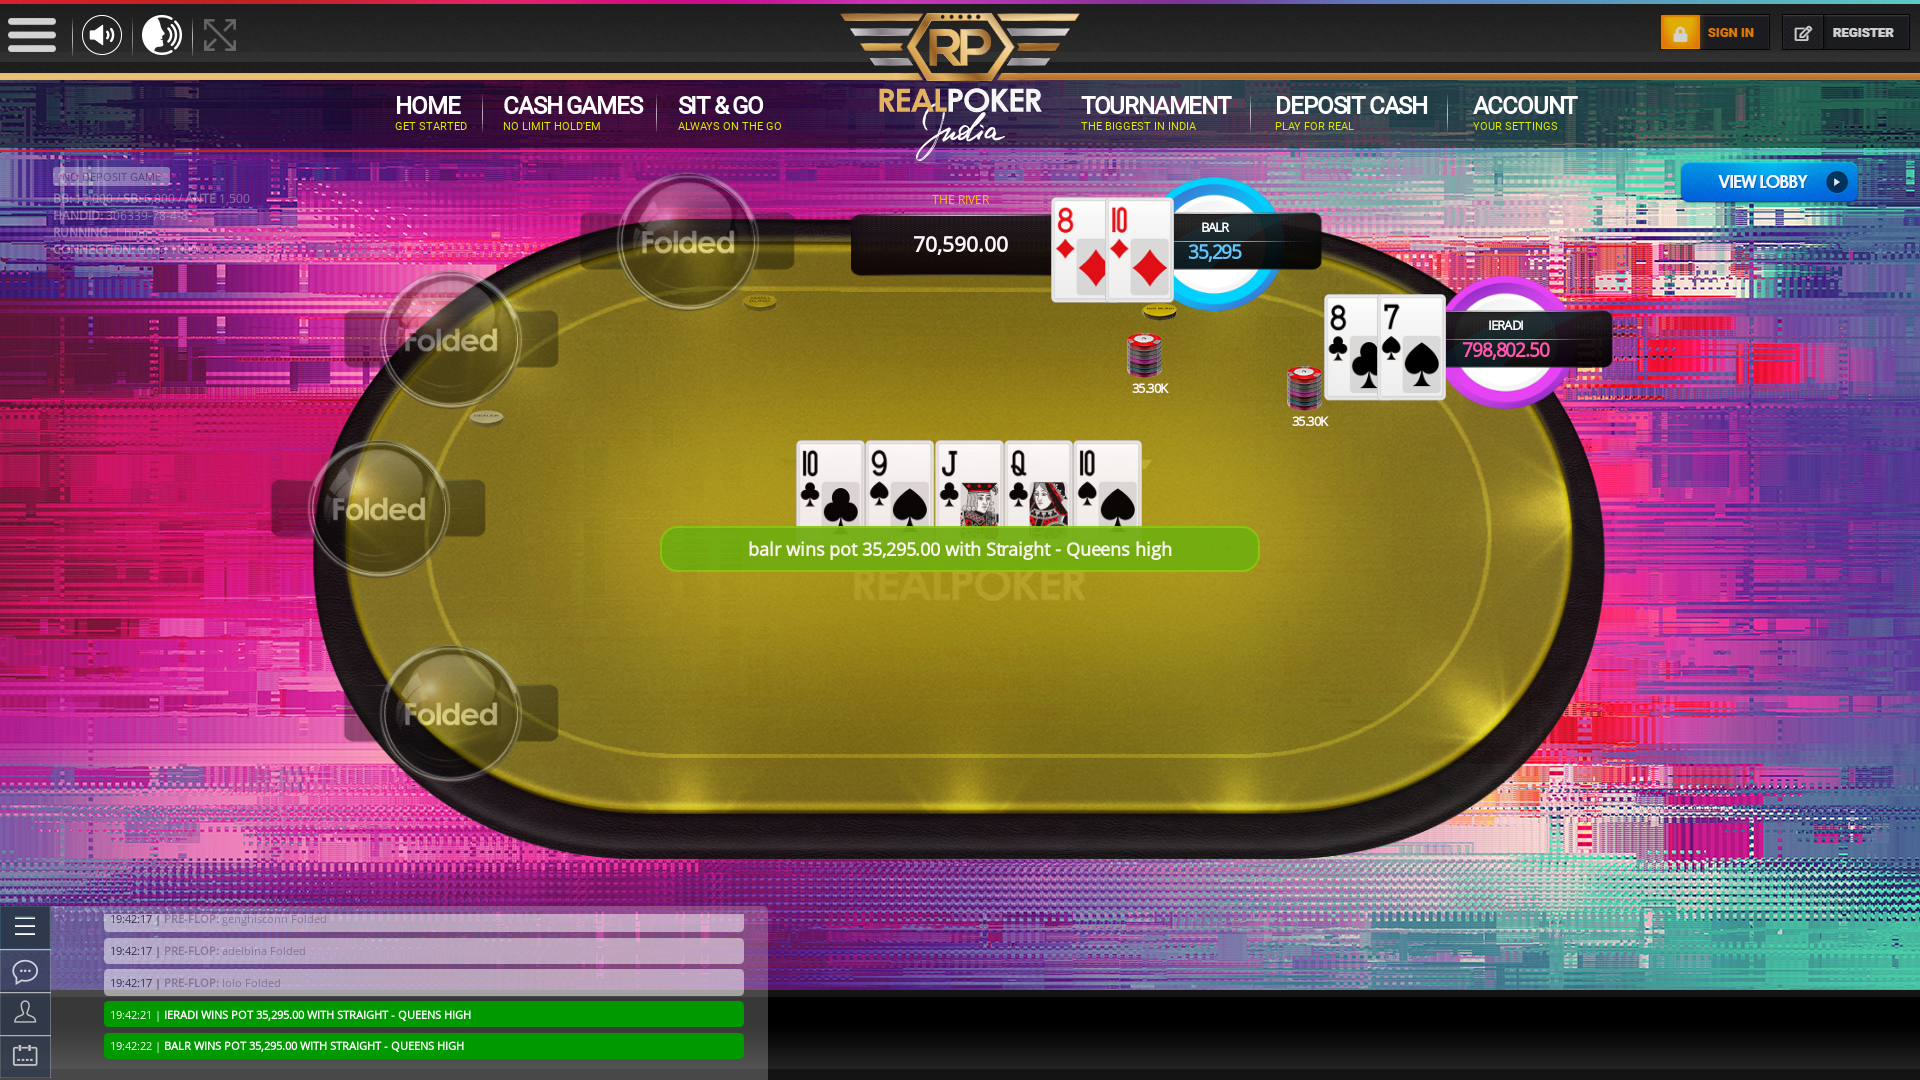 Indian online poker on a 10 player table in the 91st minute match up